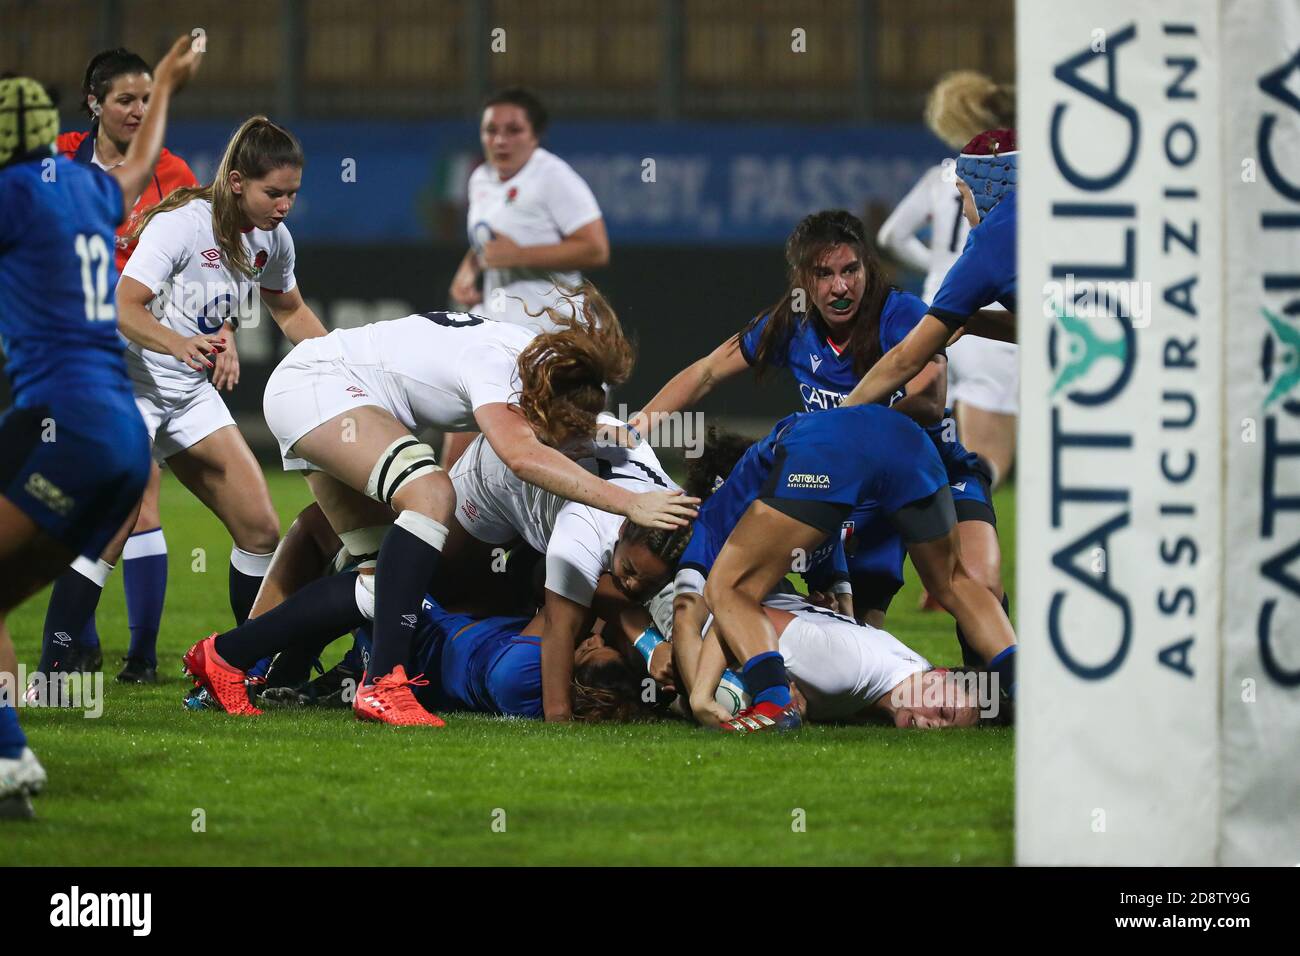 Parma, Italy. 1st Nov, 2020. parma, Italy, Sergio Lanfranchi stadium, 01 Nov 2020, Italy with a desparate defense in the ruck during Women 2020 - Italy vs England - Rugby Six Nations match - Credit: LM/Massimiliano Carnabuci Credit: Massimiliano Carnabuci/LPS/ZUMA Wire/Alamy Live News Stock Photo